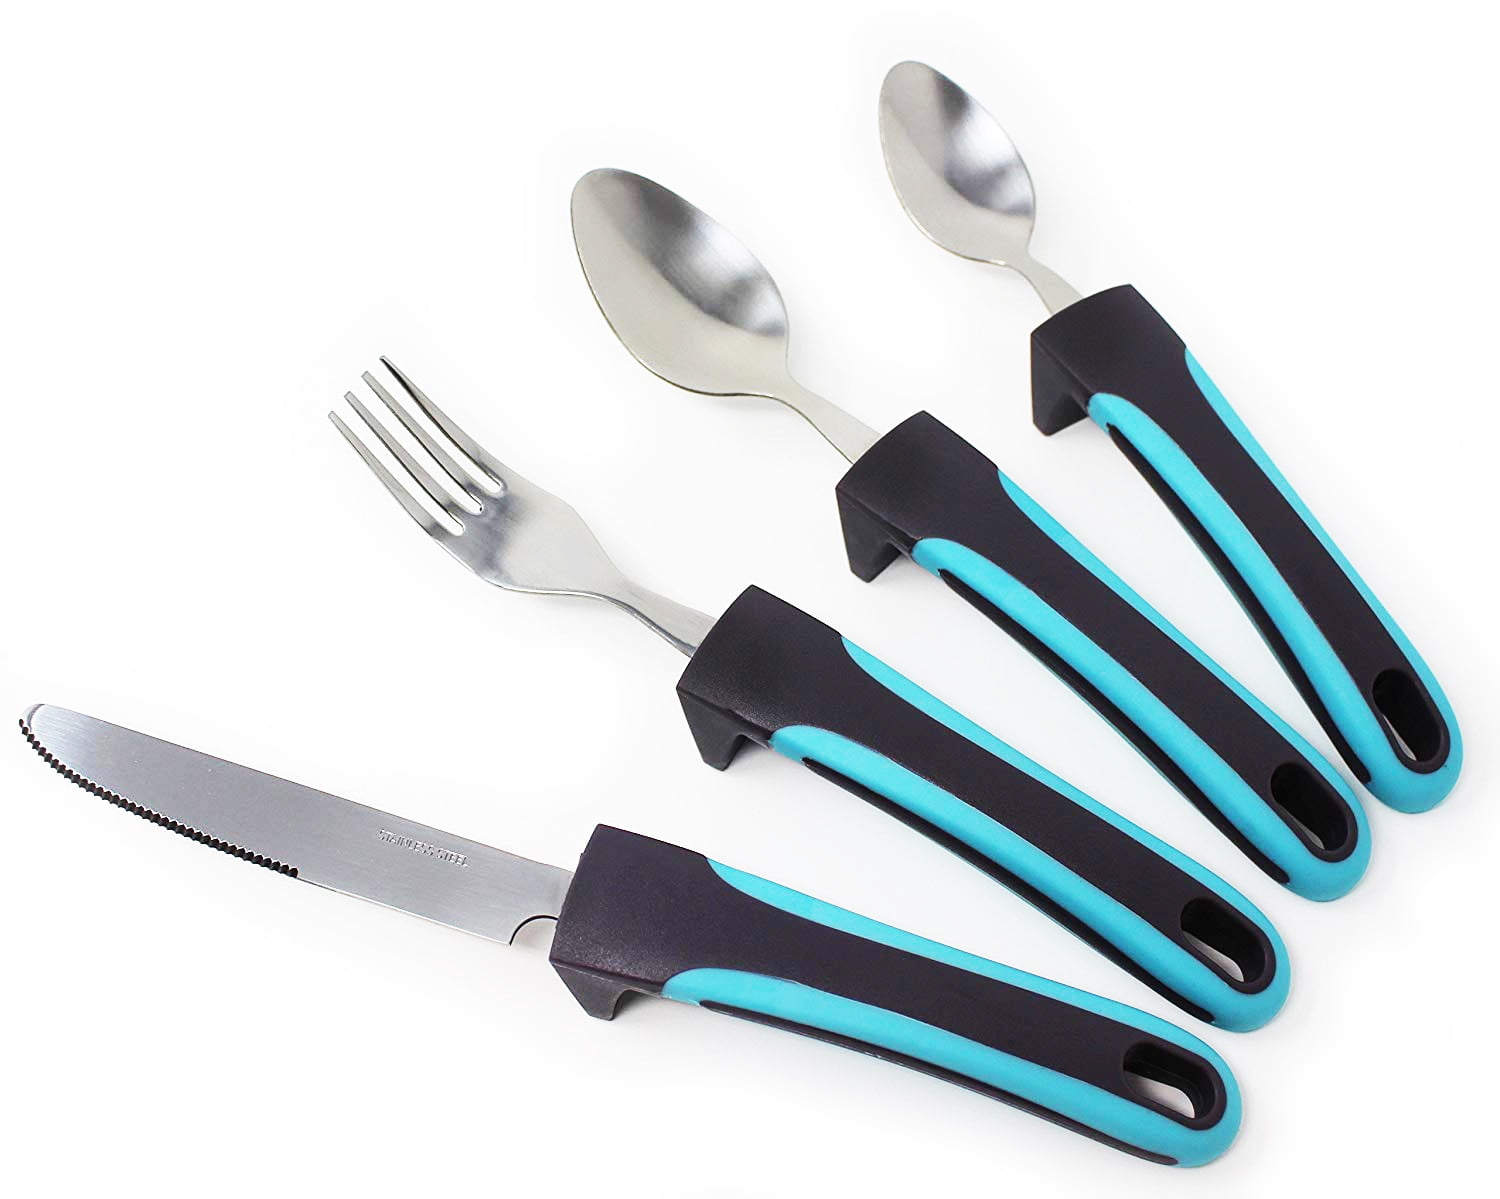  Fstcrt Adaptive Utensils Spoons Forks Set Weighted, Non-Slip  Handles & rubber strap, for Hand Tremors & Muscle Weakness, Arthritis,  Parkinson's, Elderly; Dishwasher Safe,Stainless Steel : Health & Household